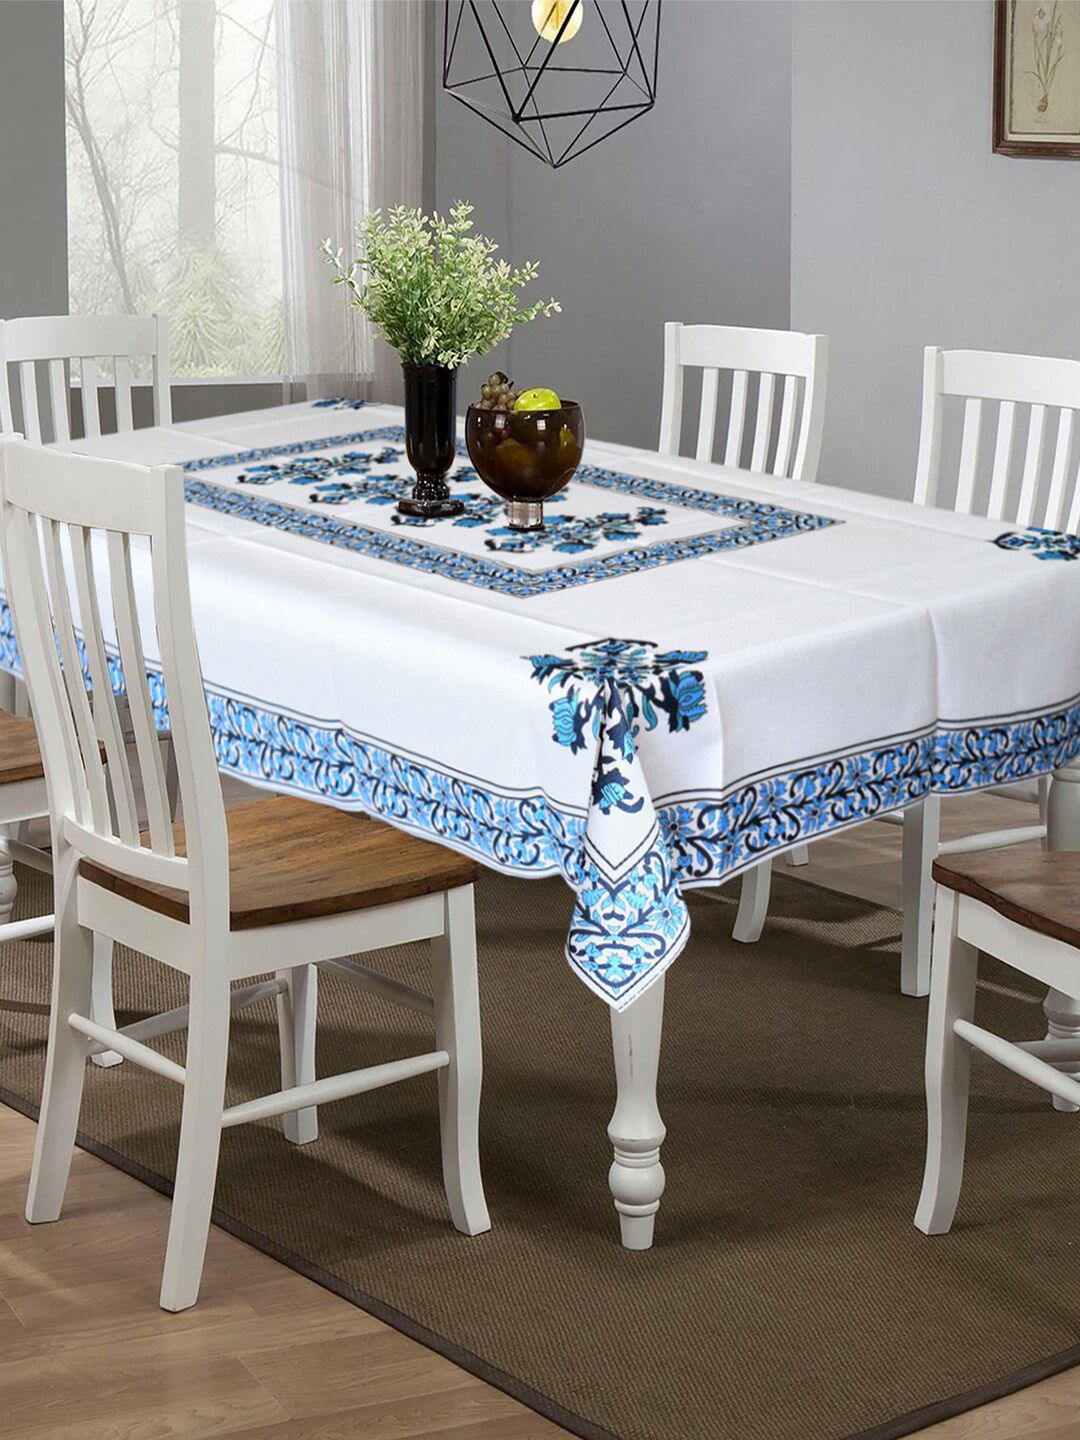 Kuber Industries Blue & White Printed 6 Seater Cotton Table Cover Price in India